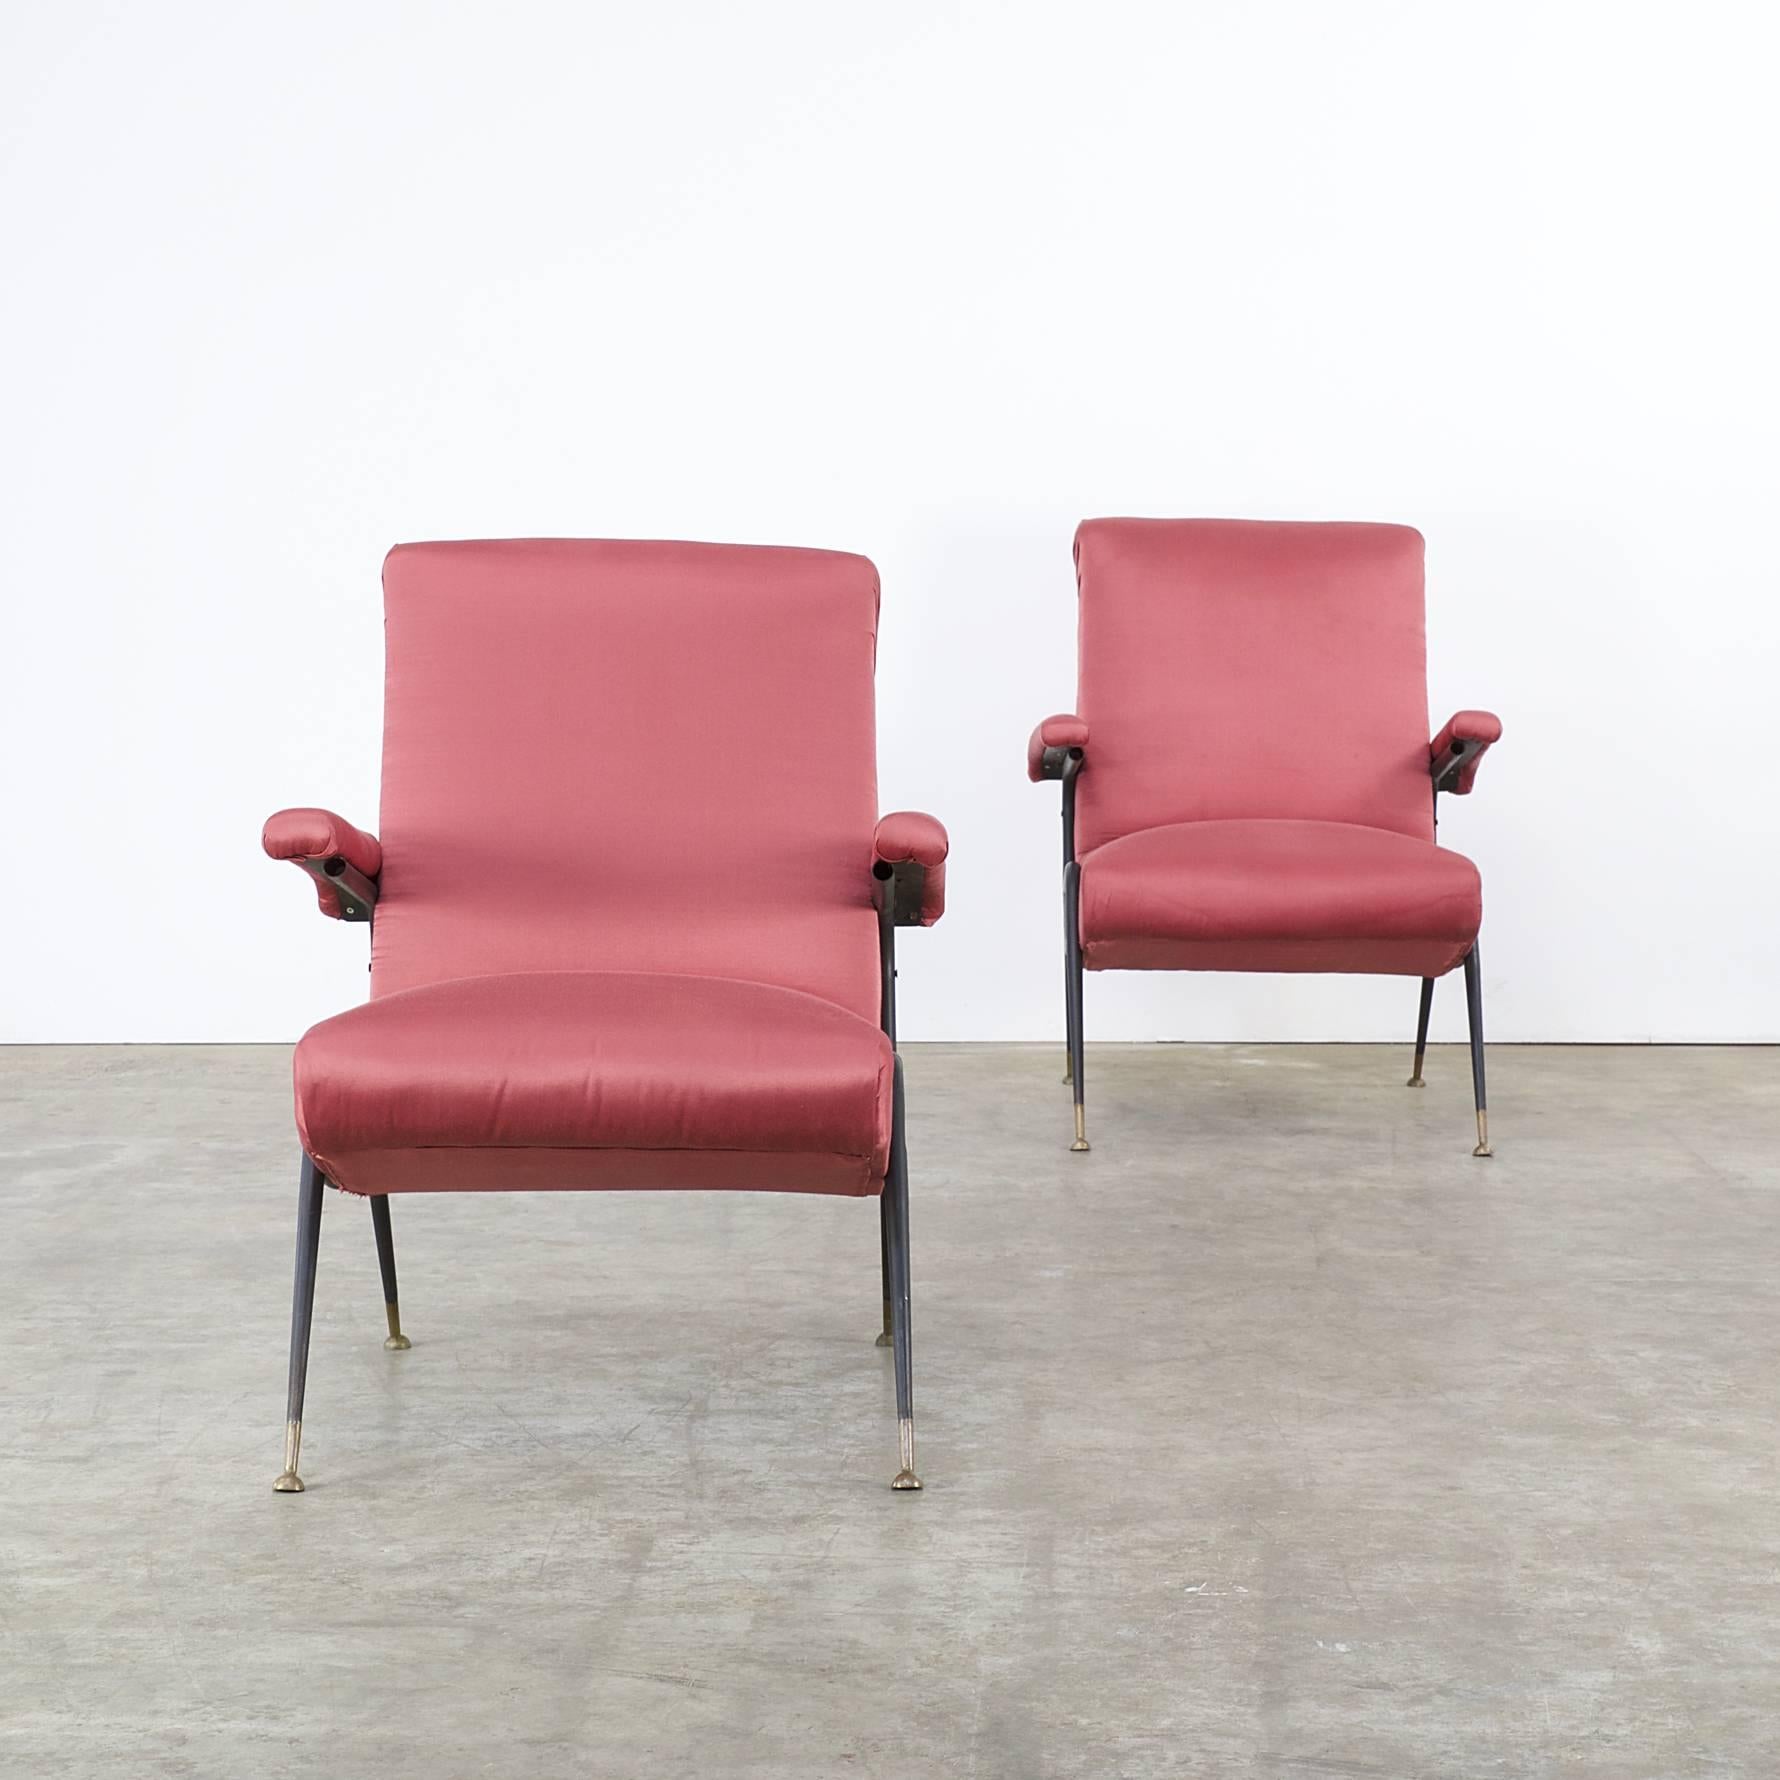 Mid-Century Modern 1960s Italian Design Chair in Old Red Fabric, Set of Two For Sale